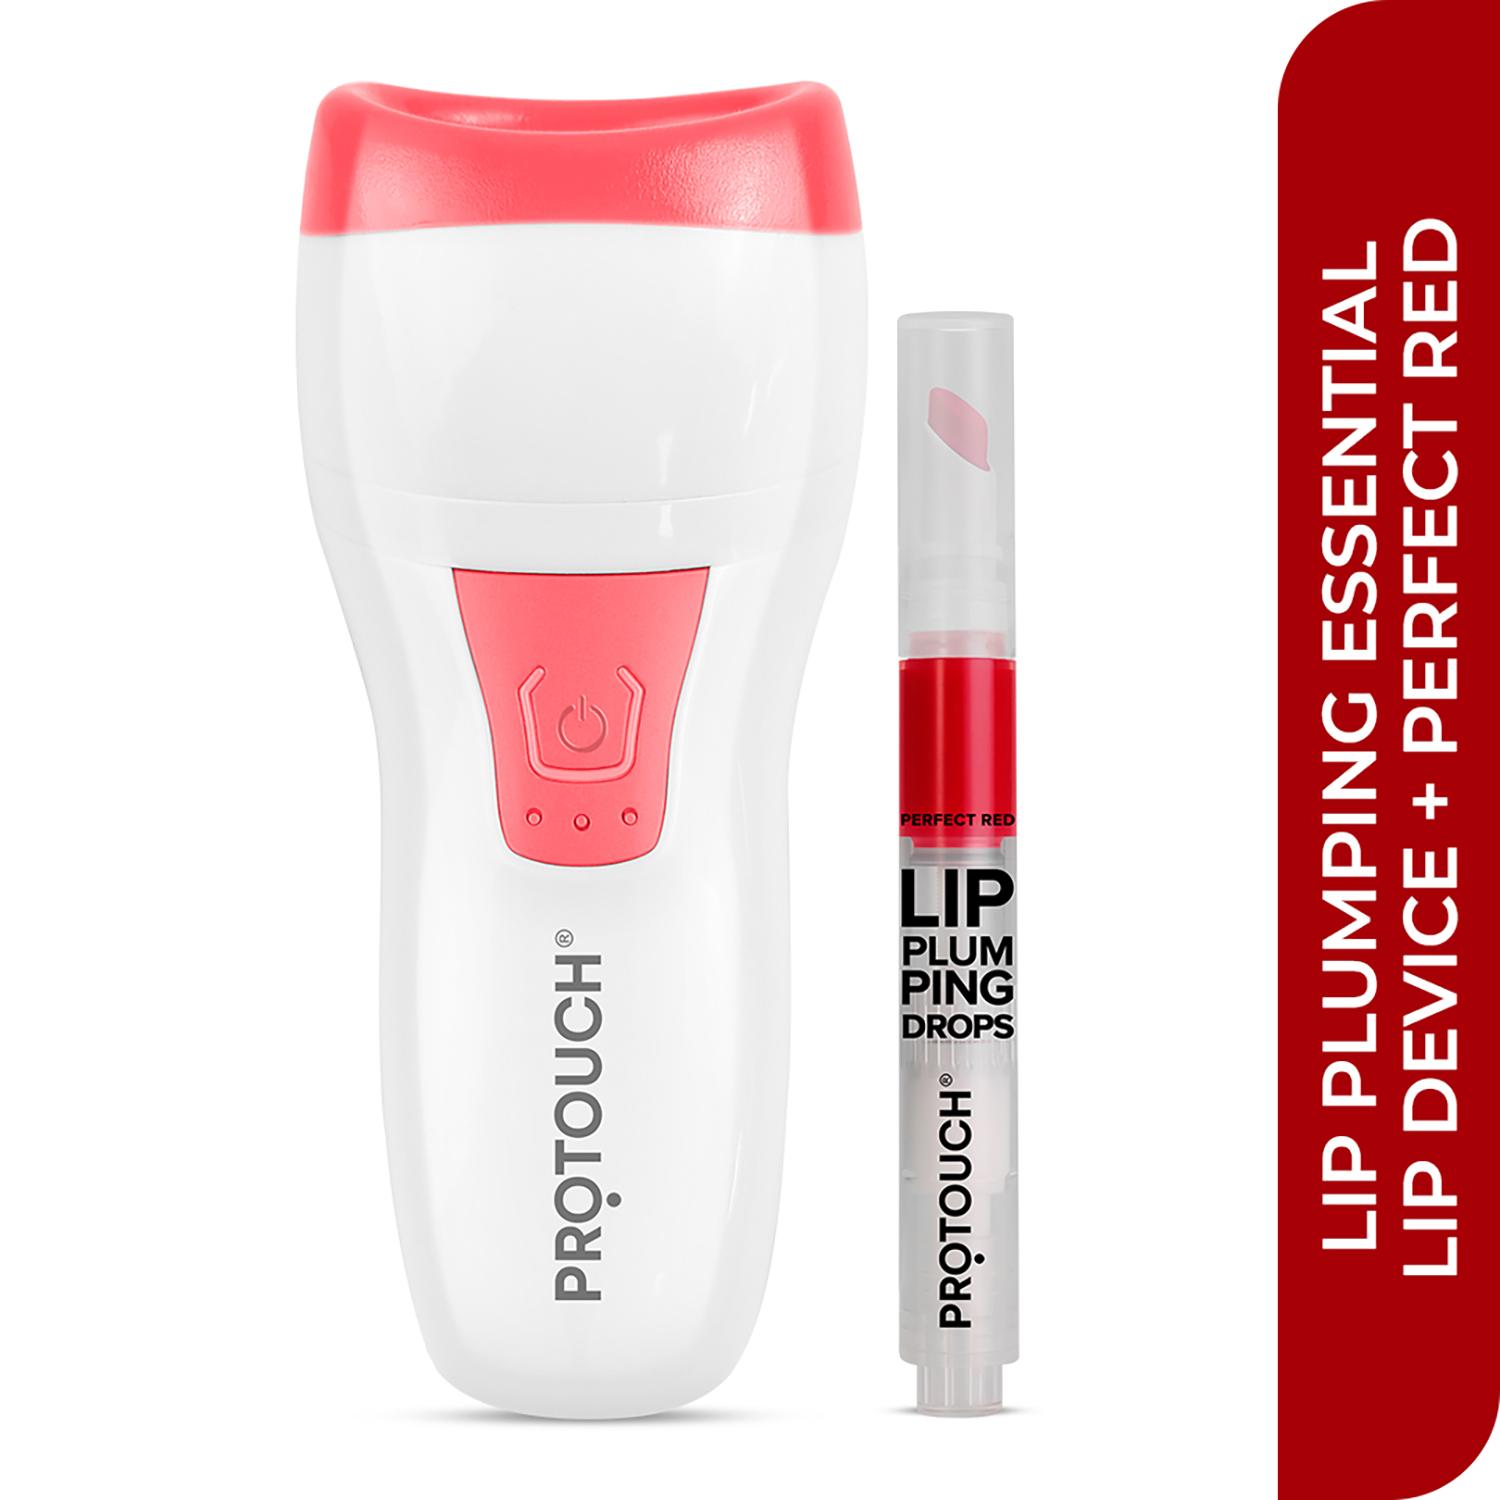 Protouch | PROTOUCH Red and White Pro Lips Lip Plumper Device, Perfect Red Lip Plumping drops Combo